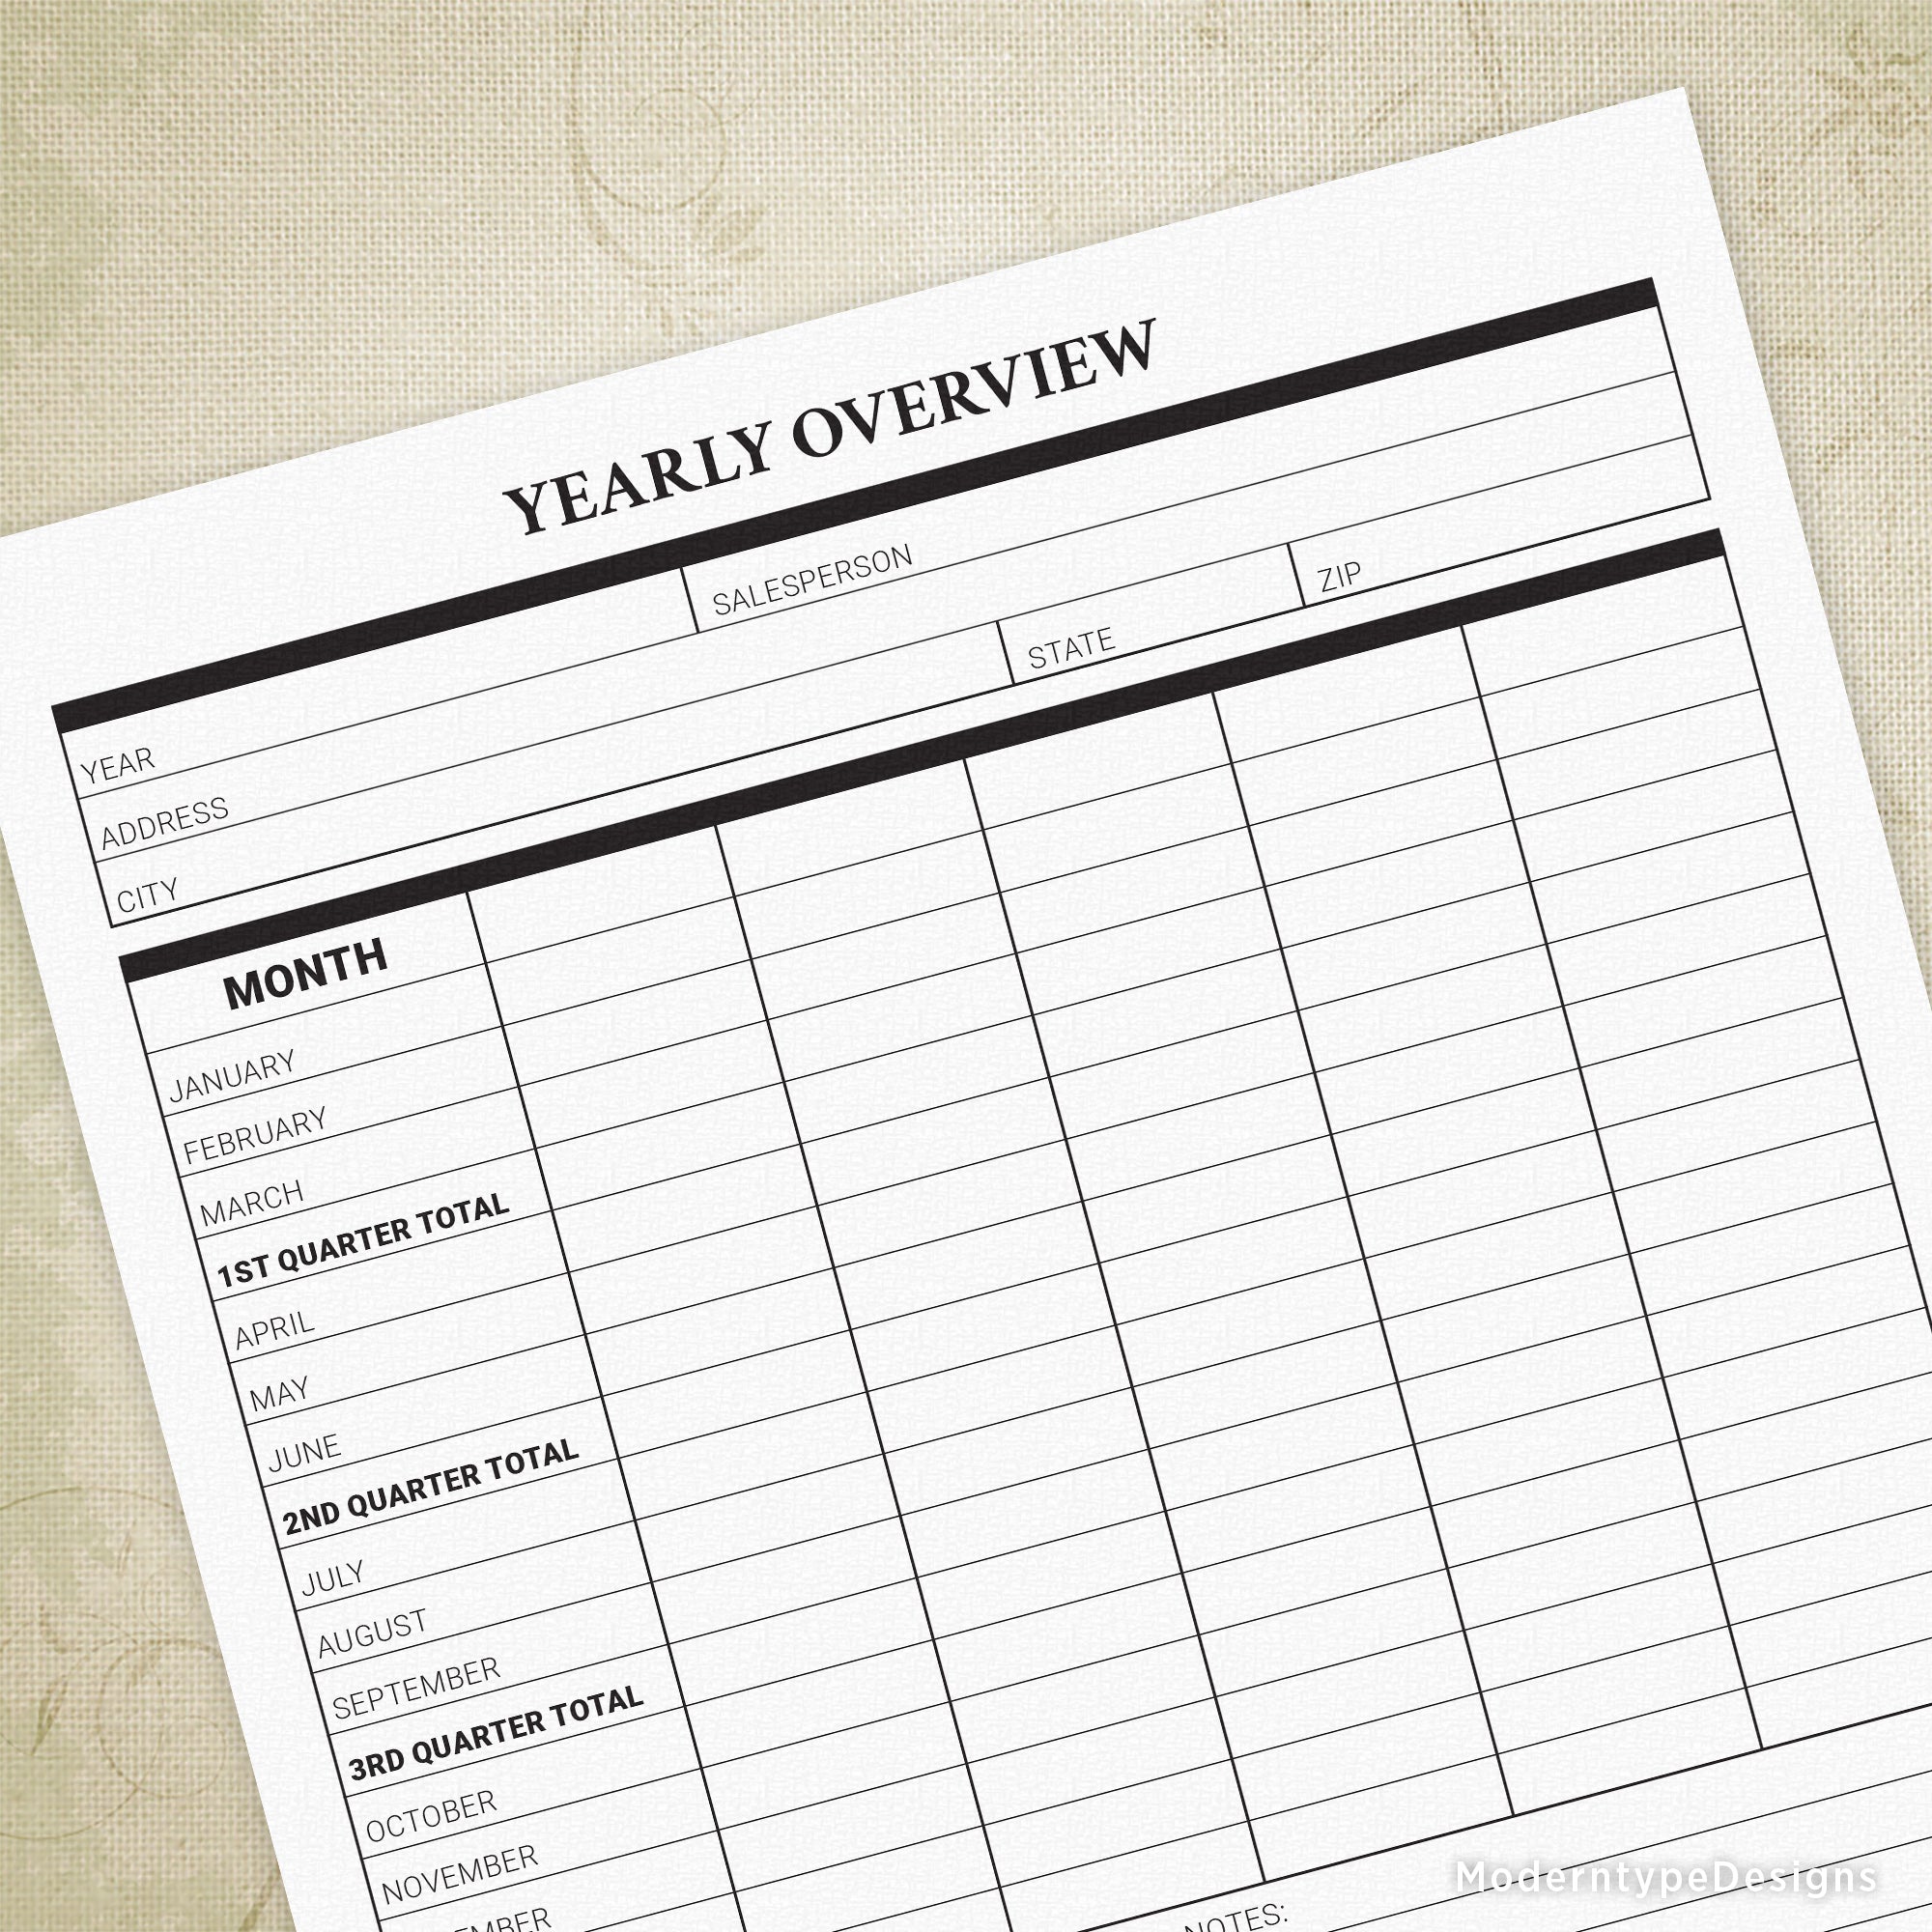 Yearly Expense Report Printable Form